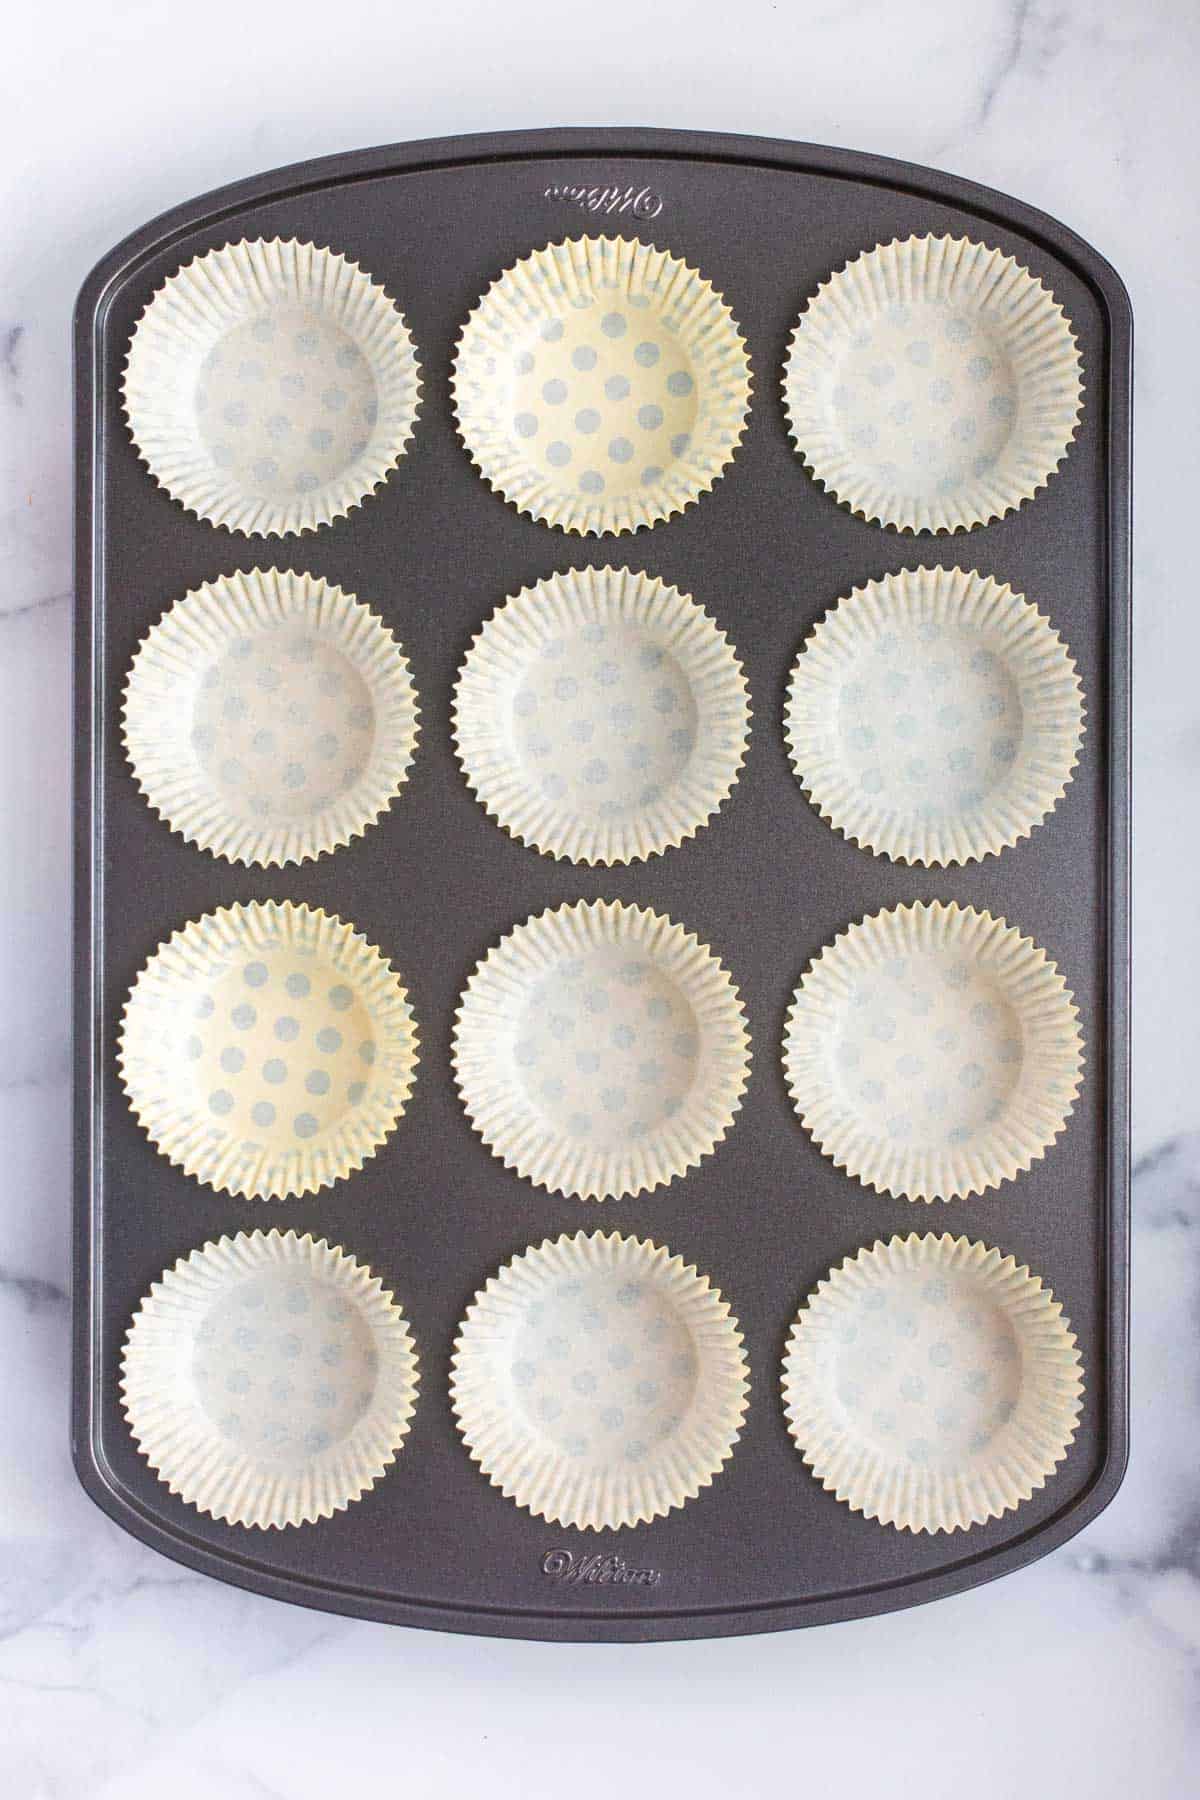 Paper baking cups sitting in a muffin baking pan.